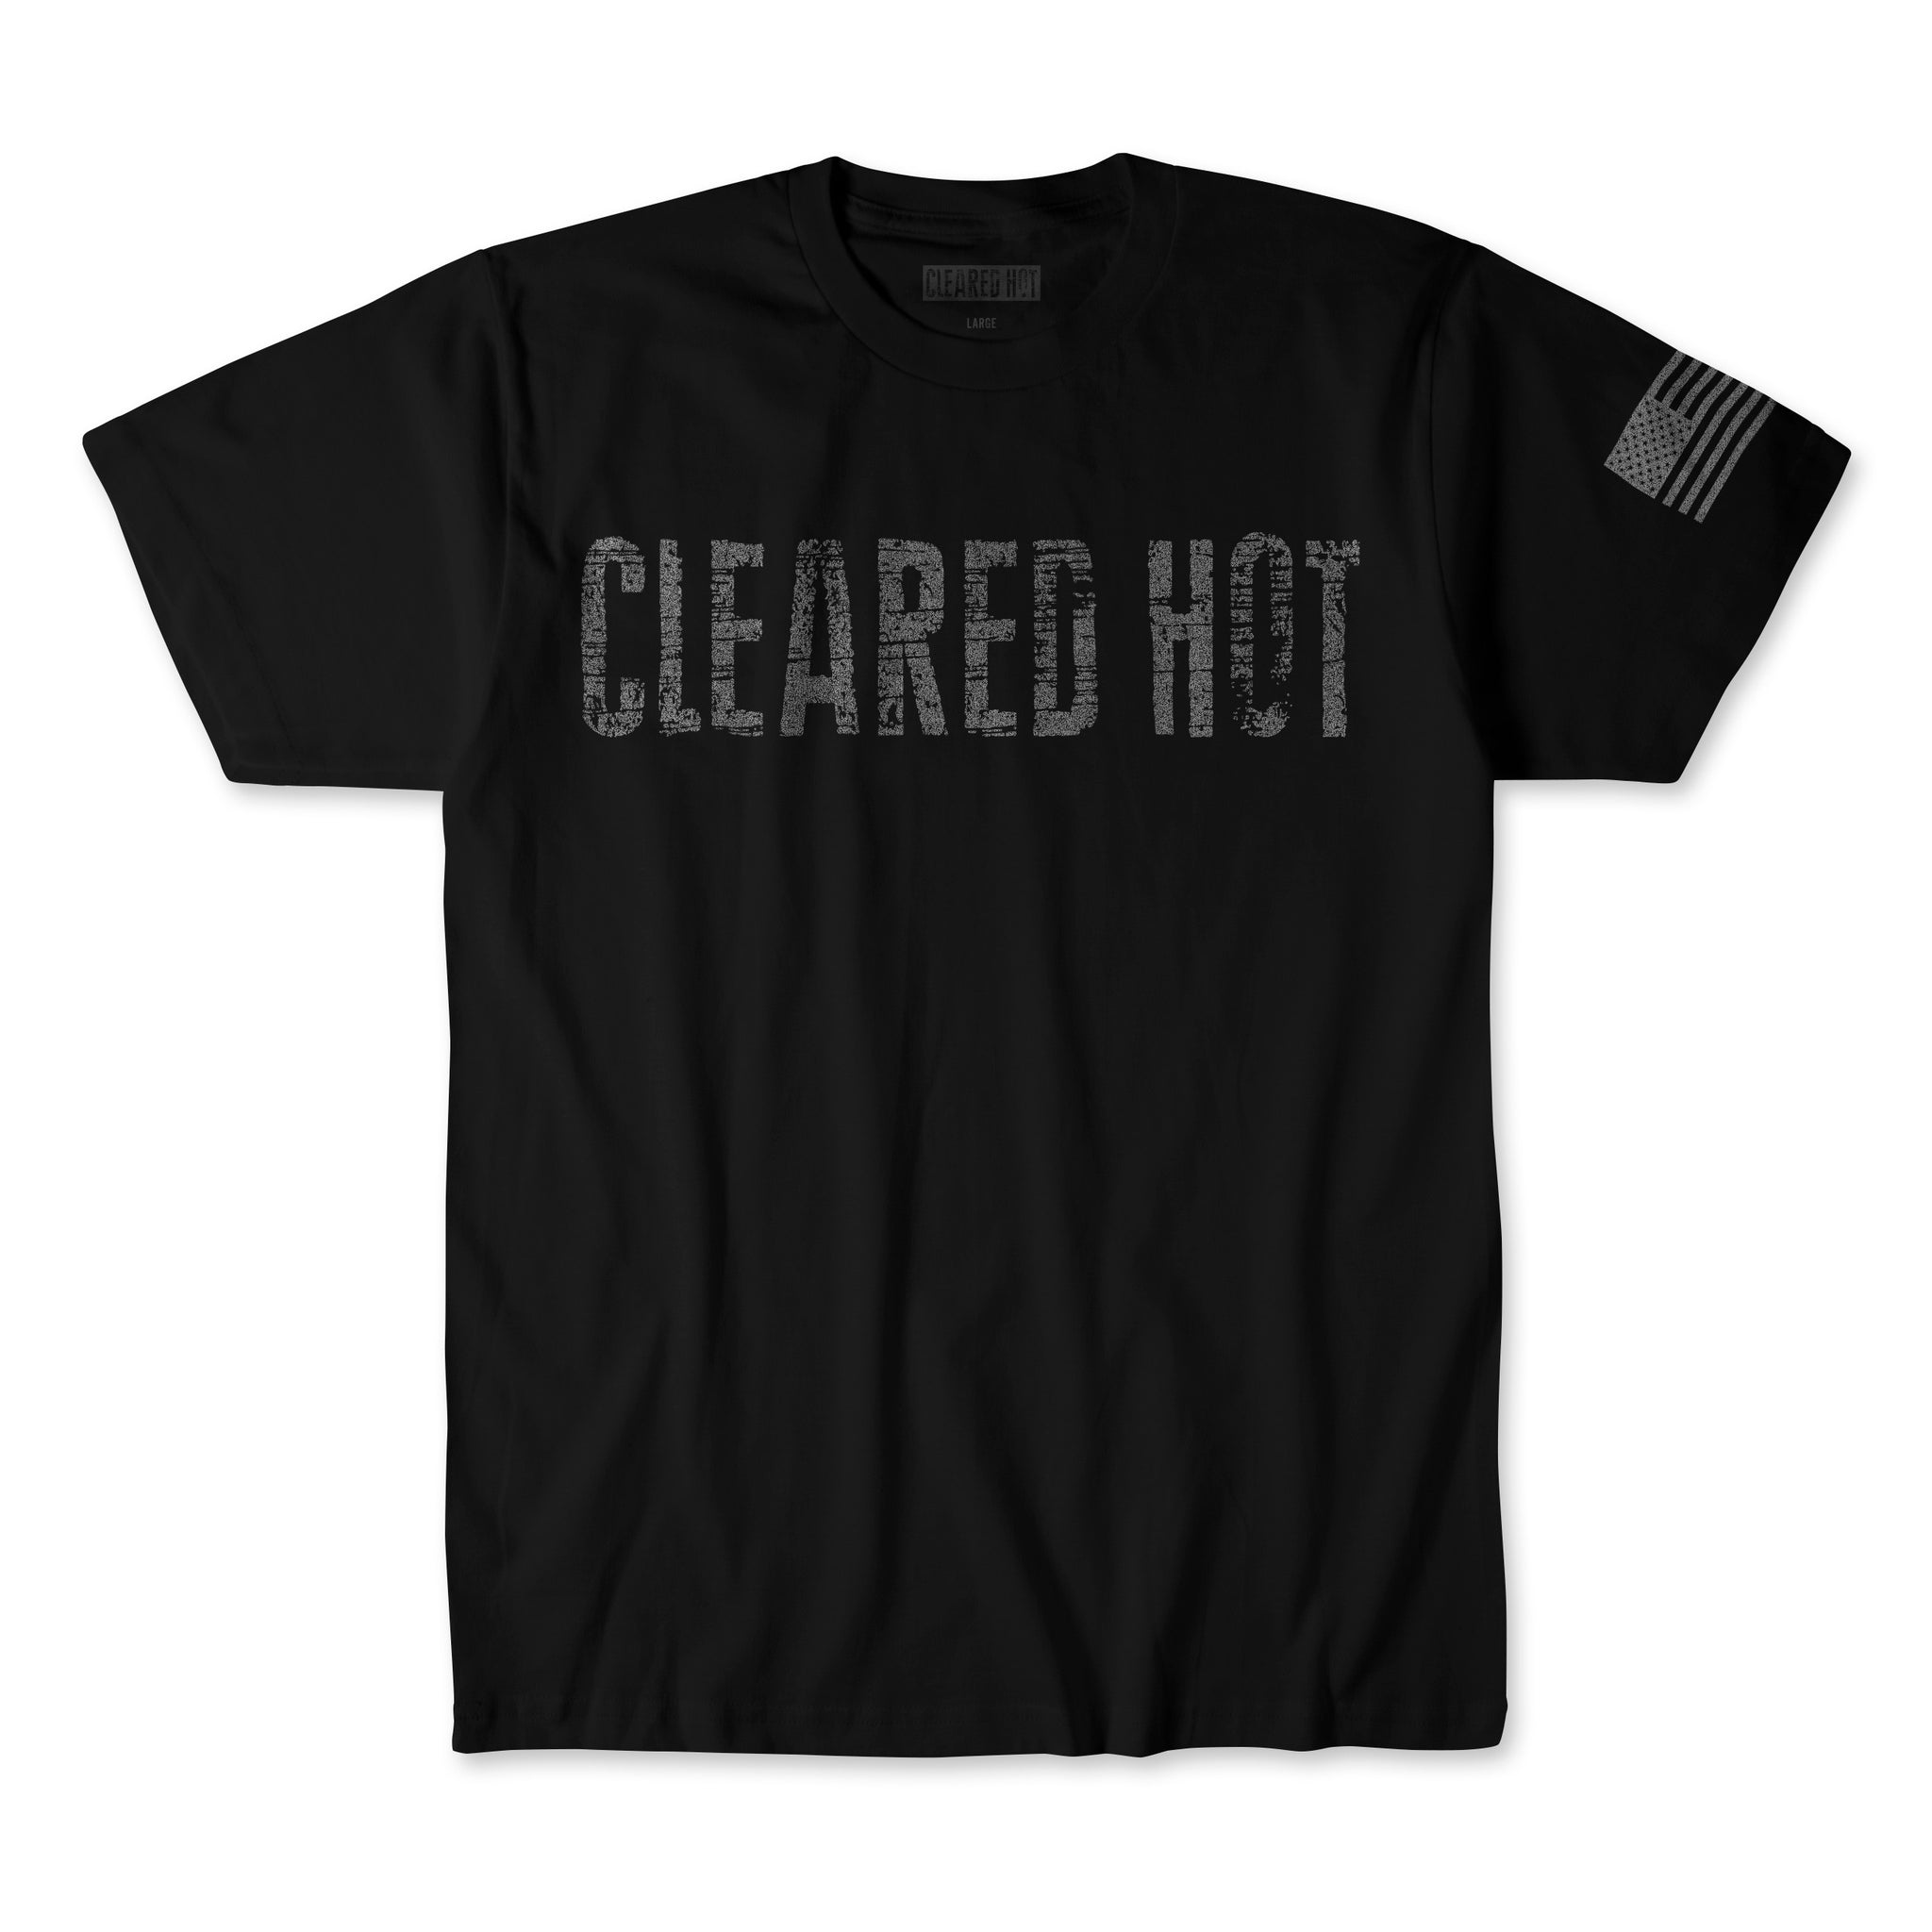 Cleared Hot Tee - Black Reflective